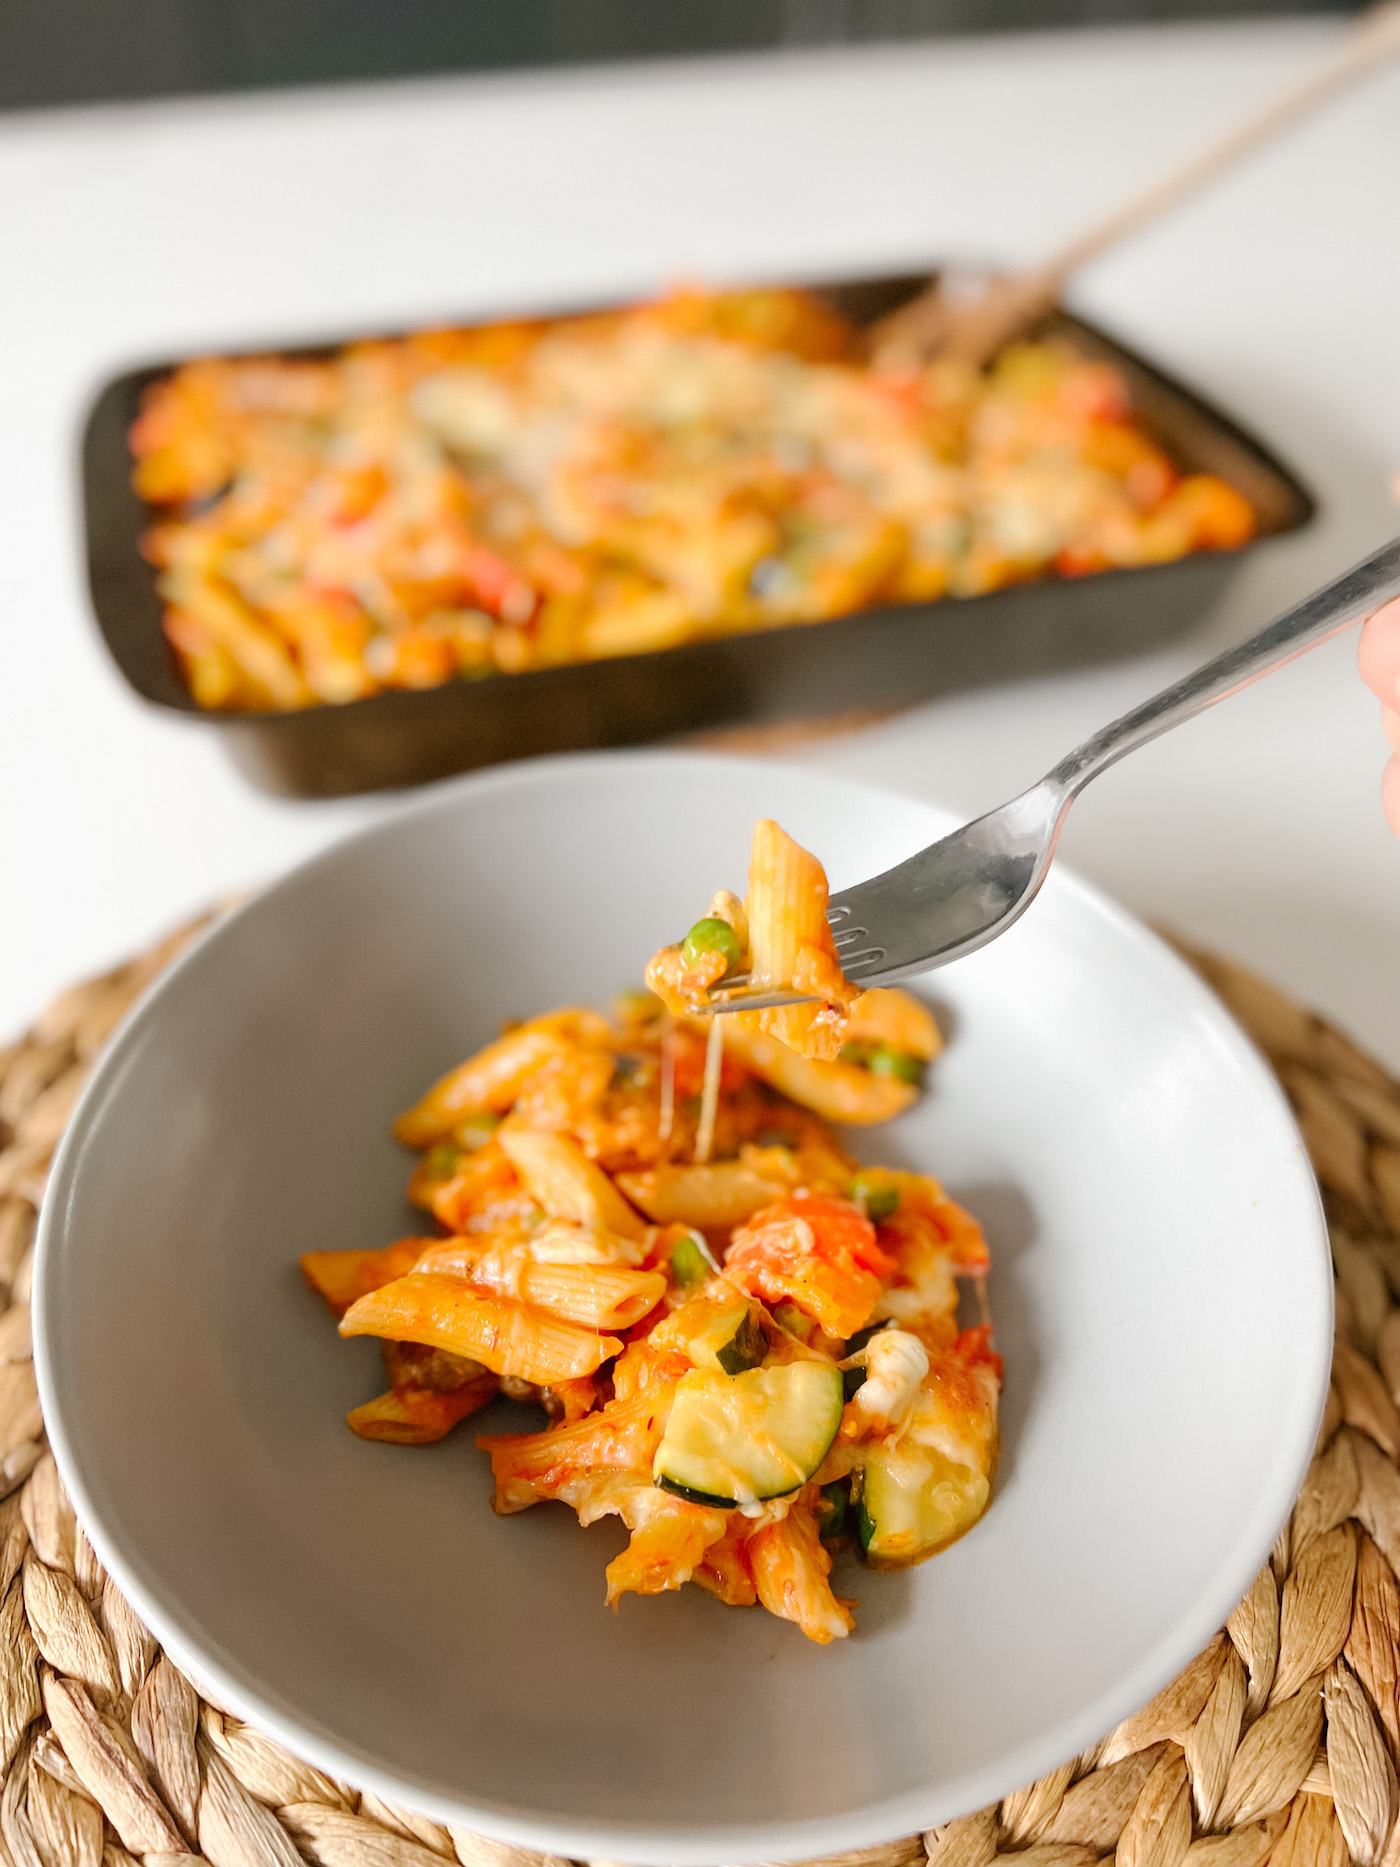 Delicious Baked Penne with Roasted Veggies Recipe